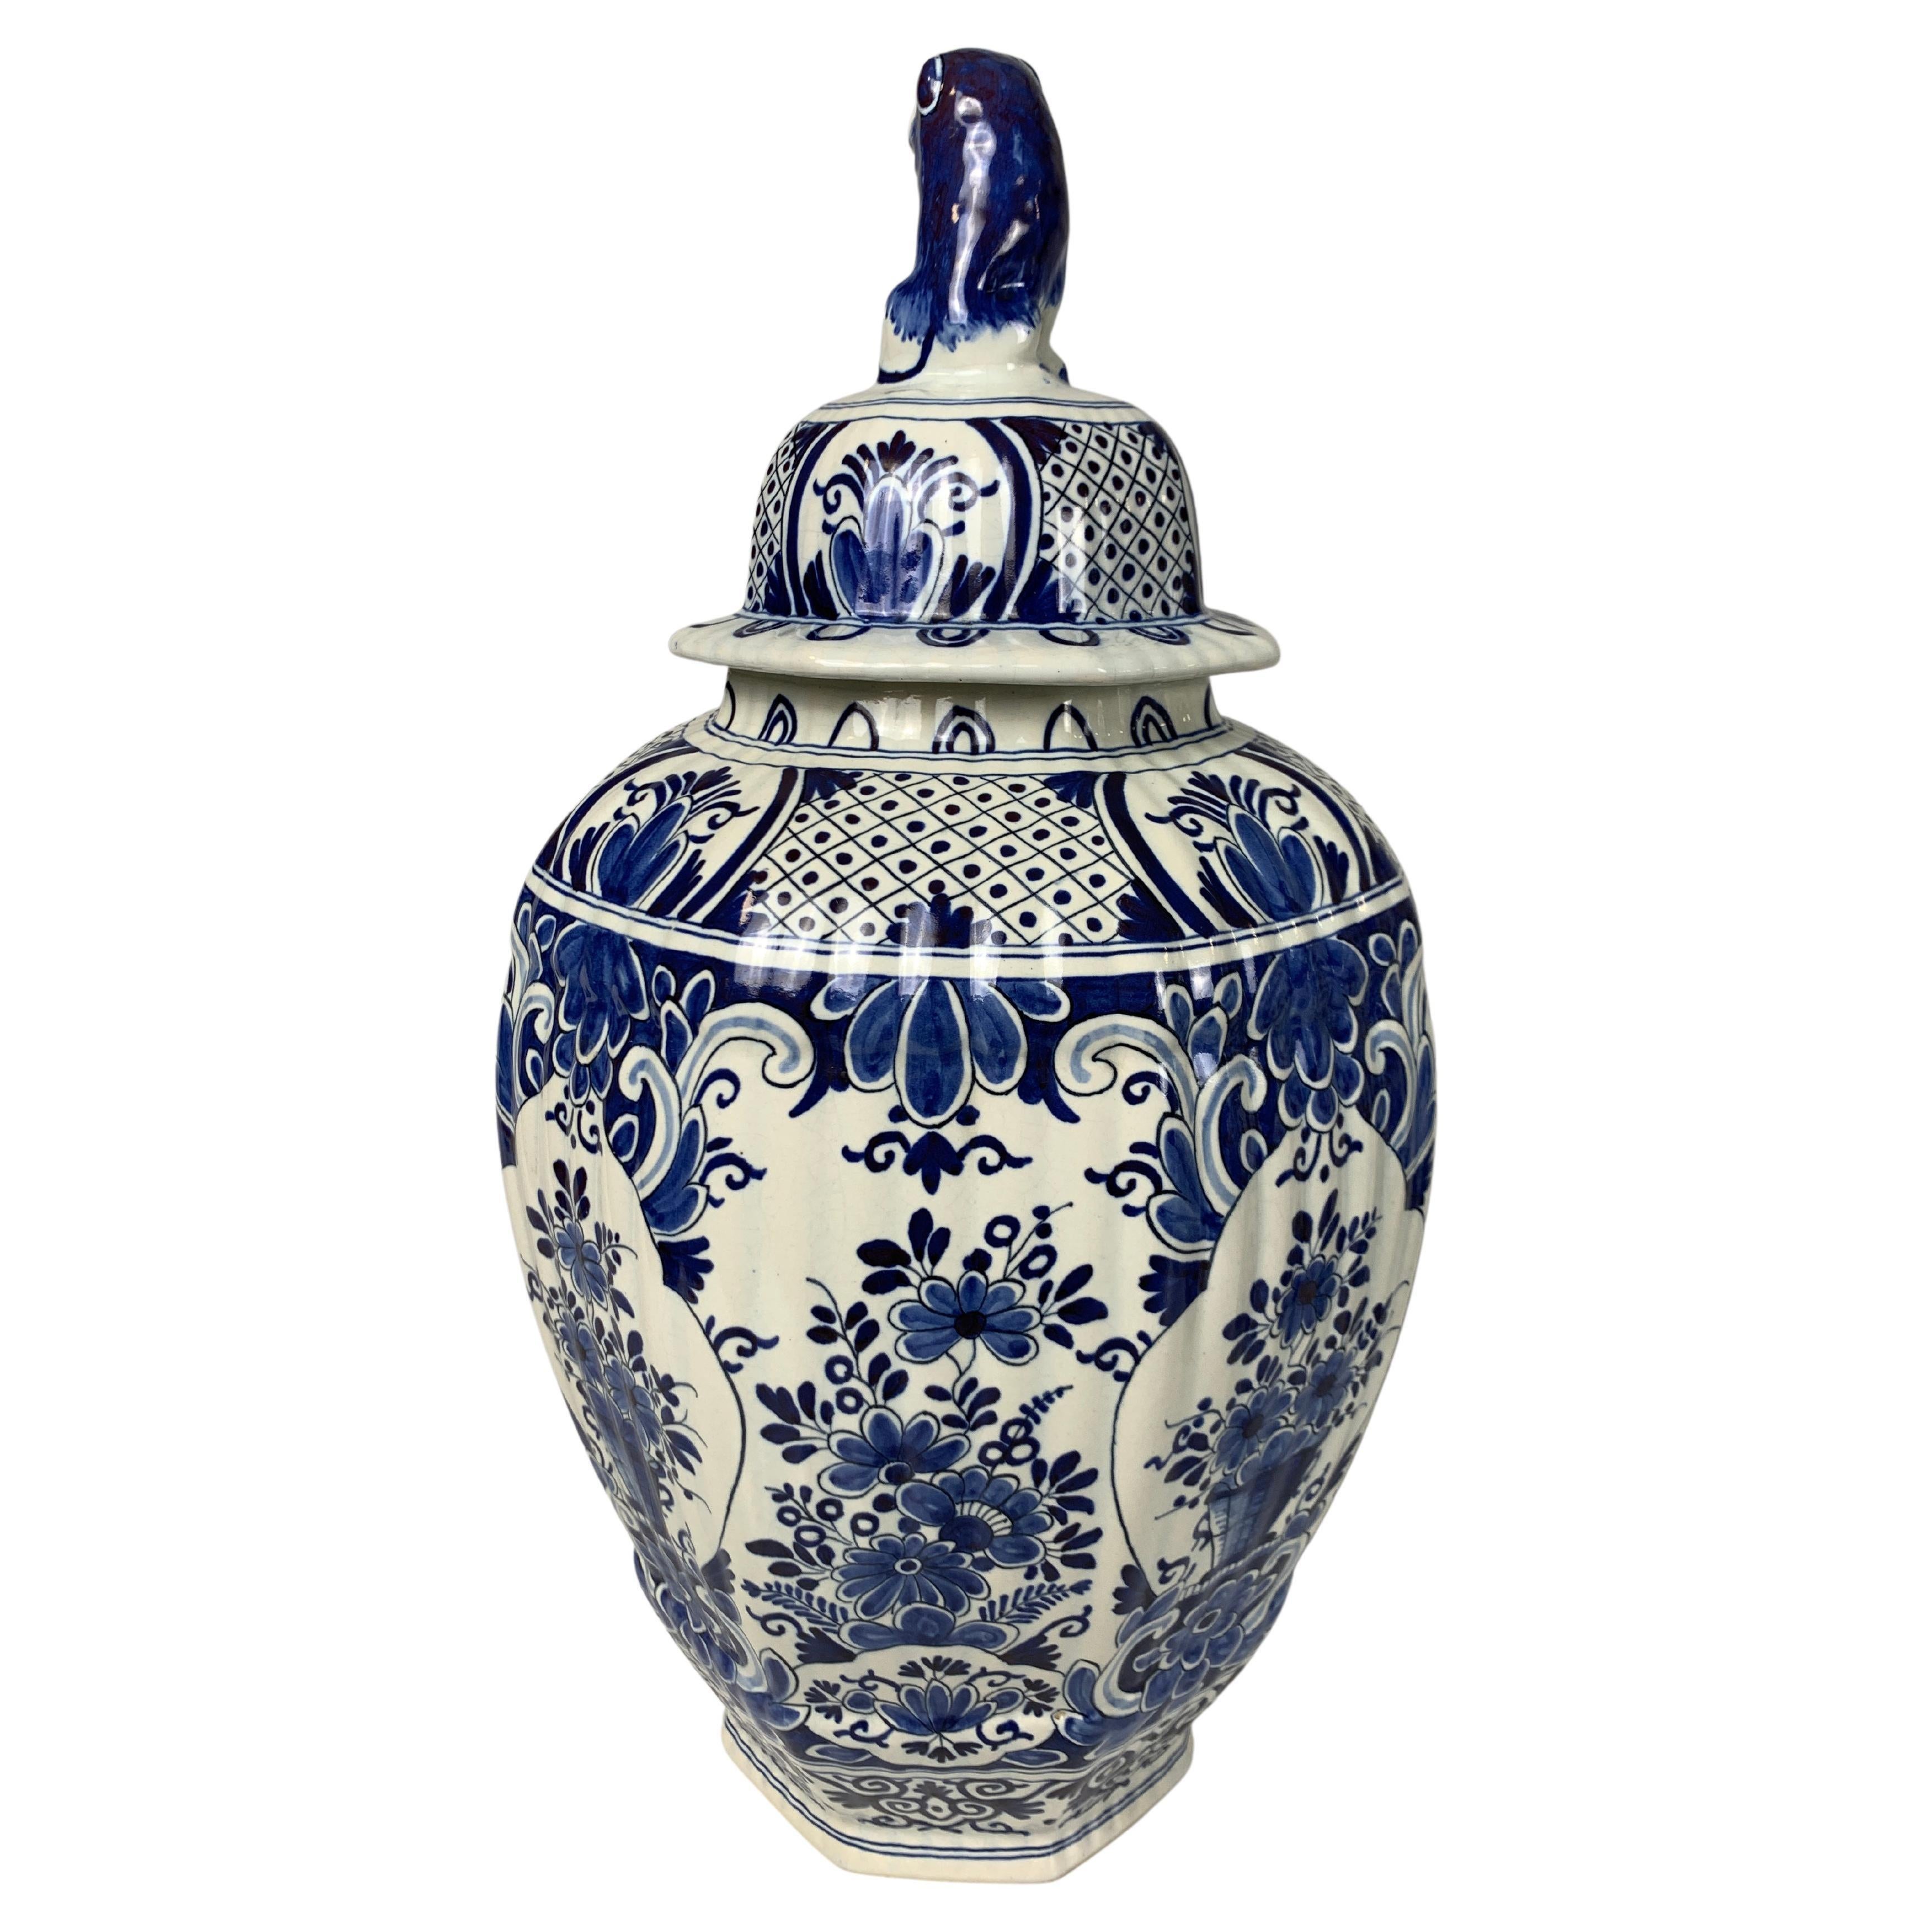 This pair of large Delft jars has a traditional blue flower decoration painted on a white tin-glaze ground. 
Each jar is painted, showing beautiful flowers.
The shoulders and cover were also decorated in a traditional style with floral panels